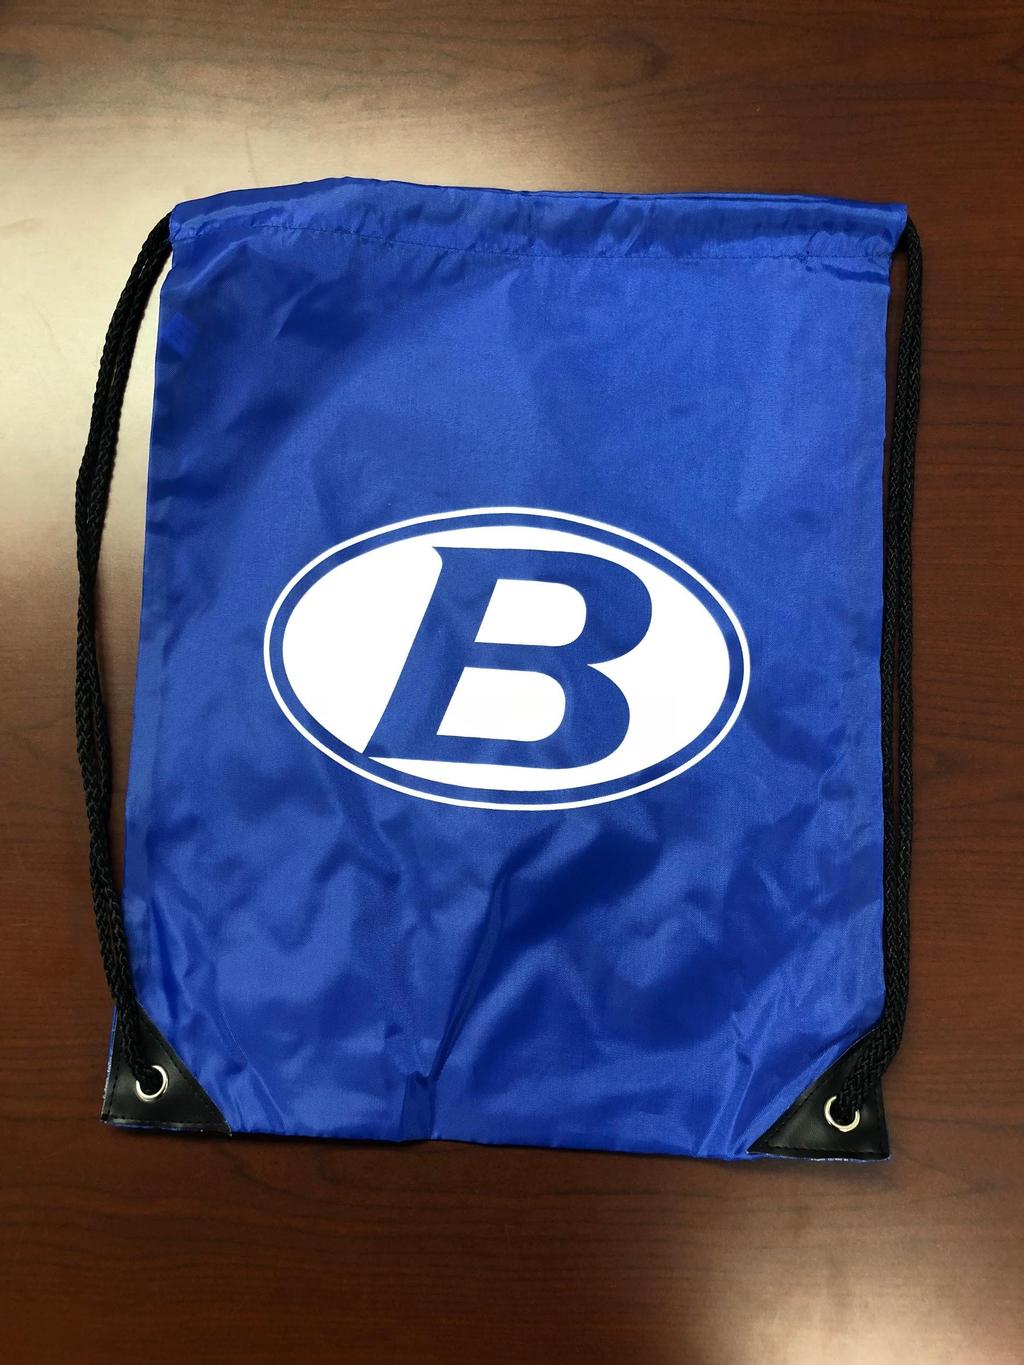 Have you gotten your Brunswick Drawstring bag yet?